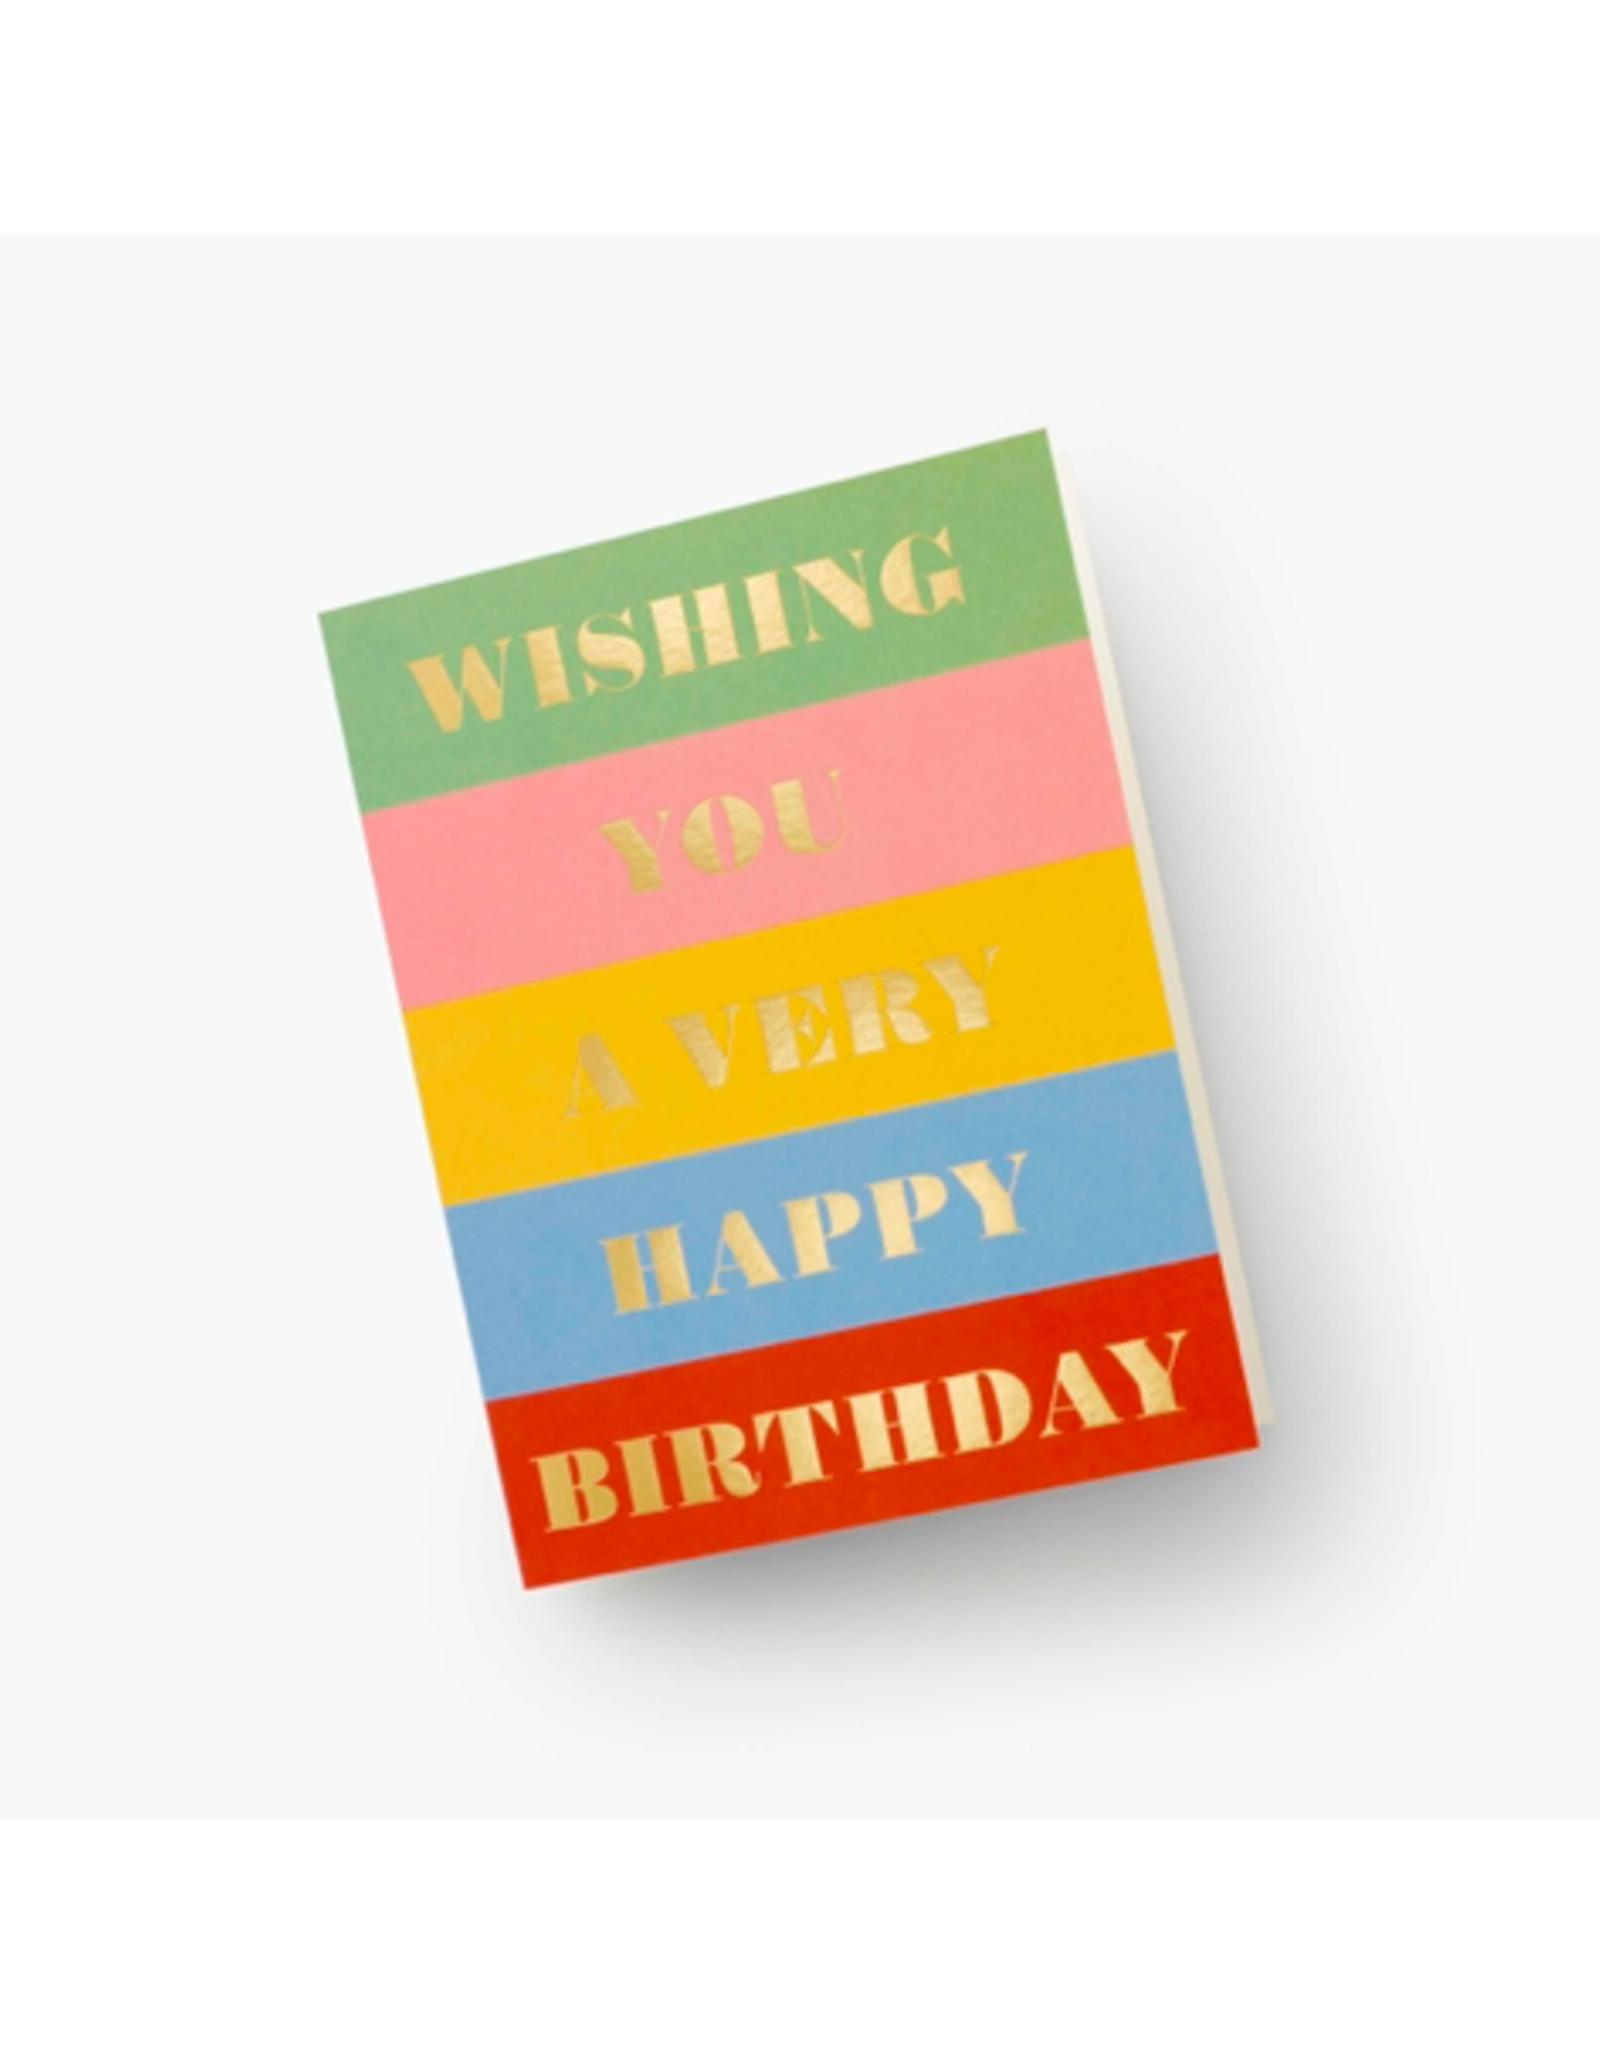 Rifle Paper - Card / Wishing You a Very Happy Birthday, 4.25 x 5.5"